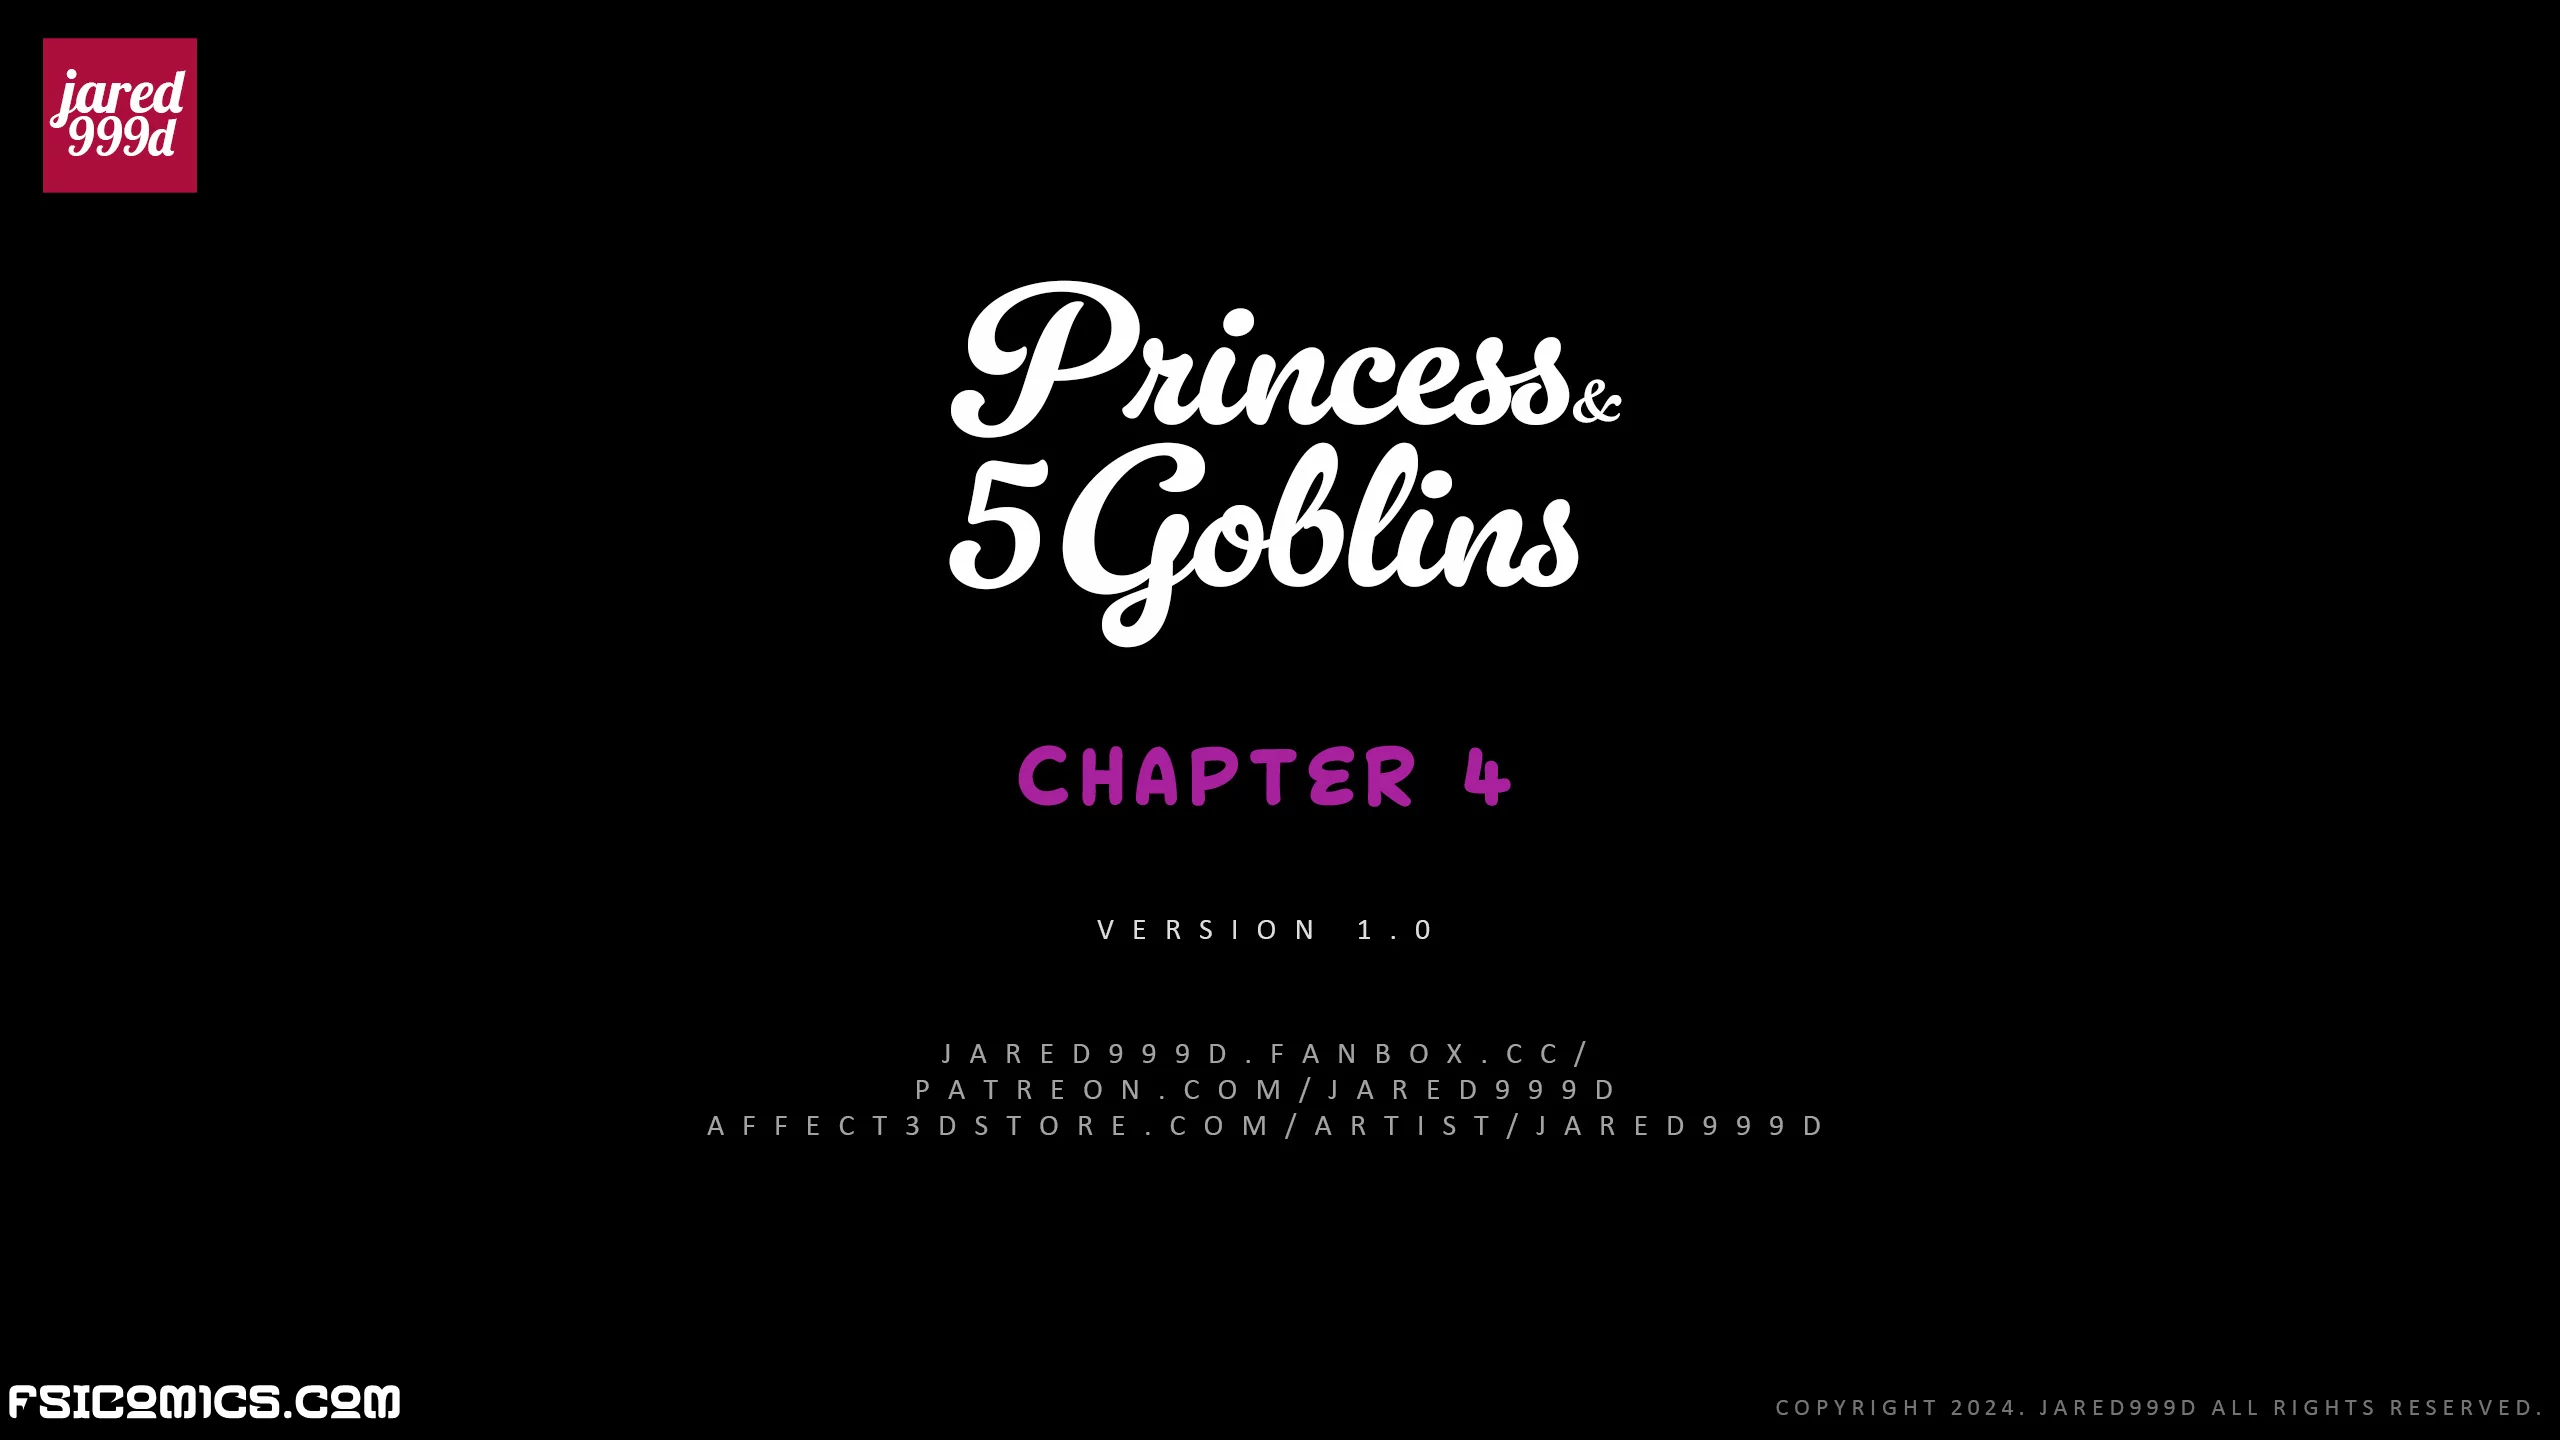 Princess And 5 Goblins Chapter 4 - Jared999D - 31 - FSIComics